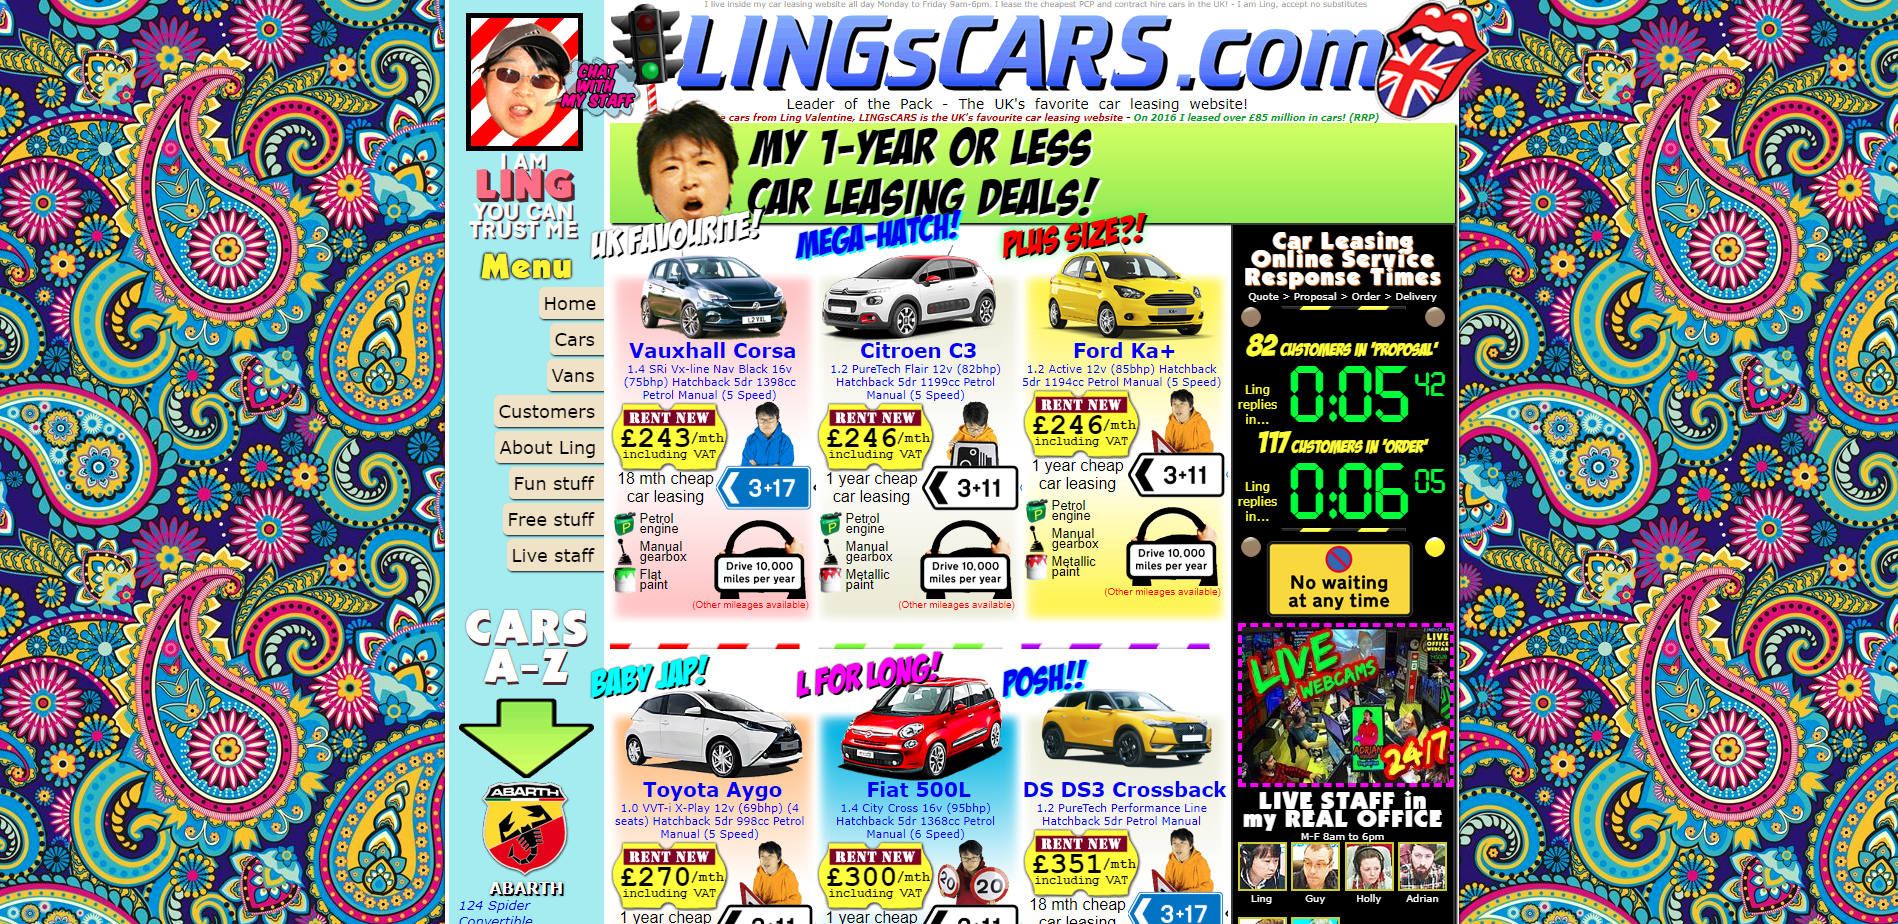 Screenshot of the Lingscars landing page